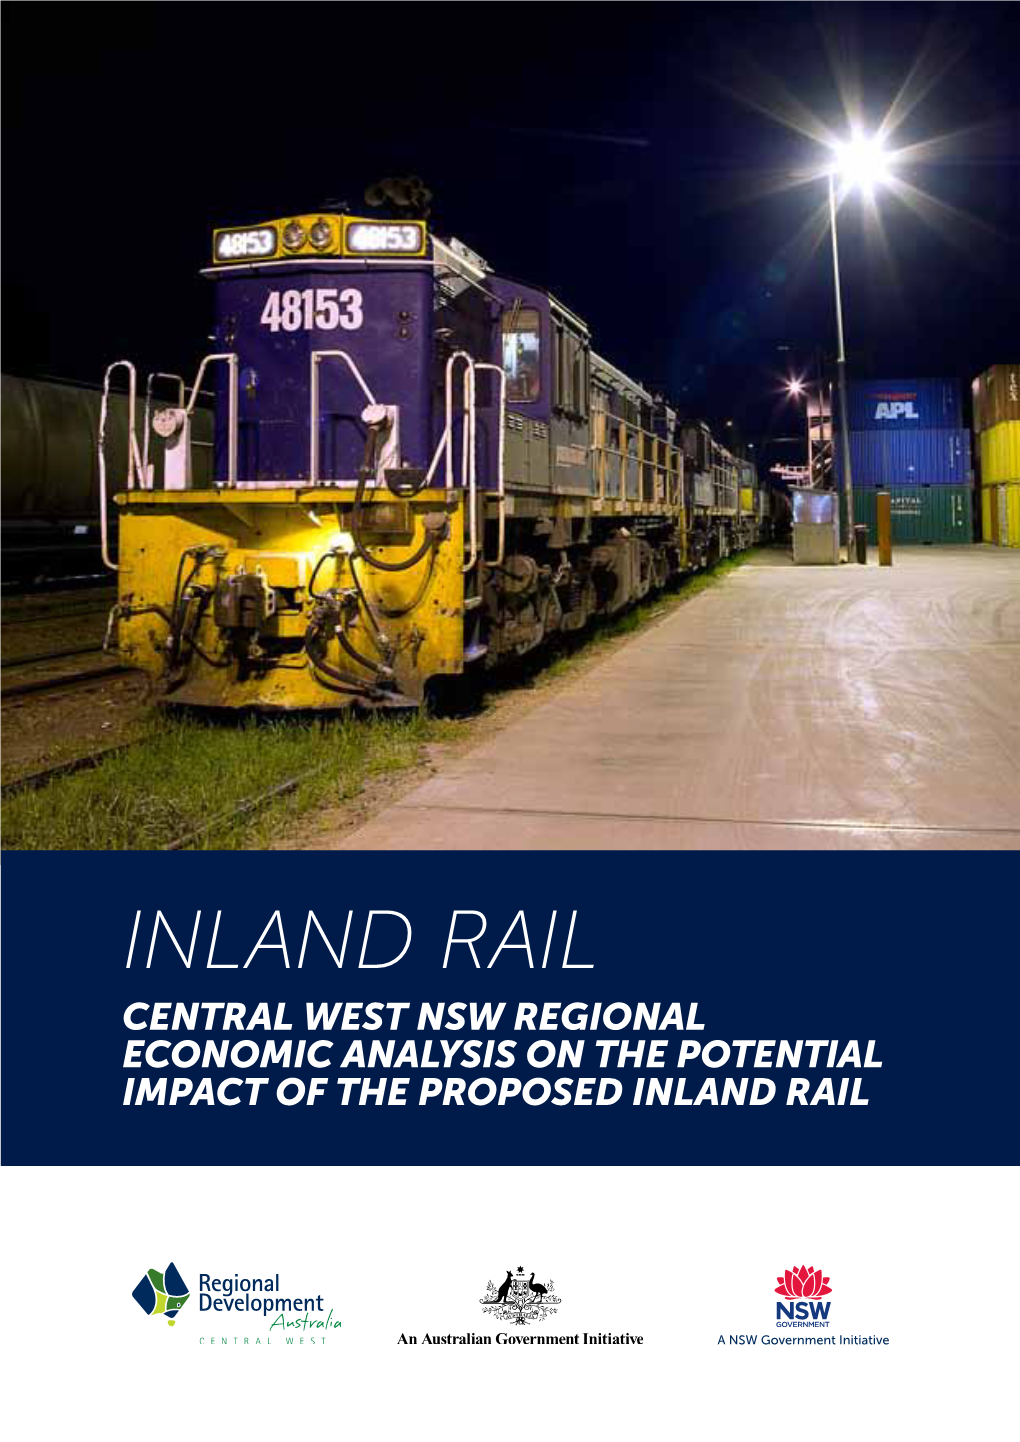 Inland Rail Central West Nsw Regional Economic Analysis on the Potential Impact of the Proposed Inland Rail